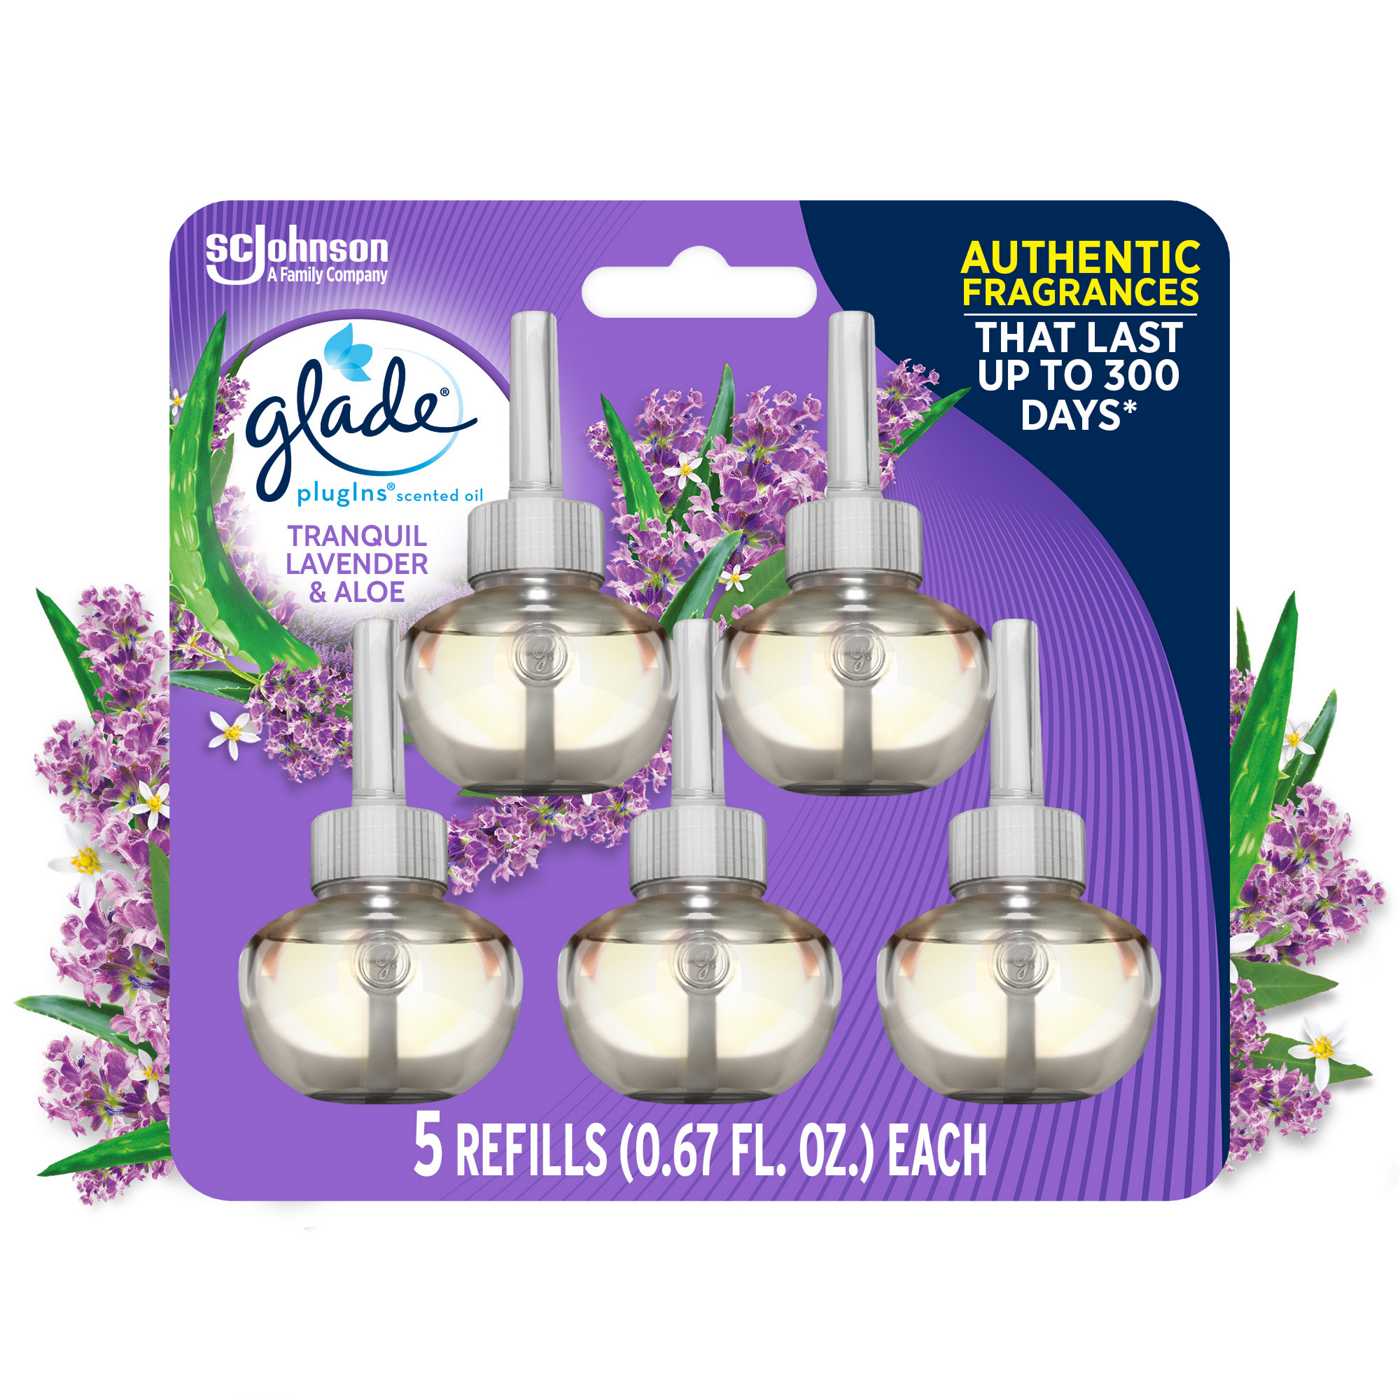 Plug In Scented Oils